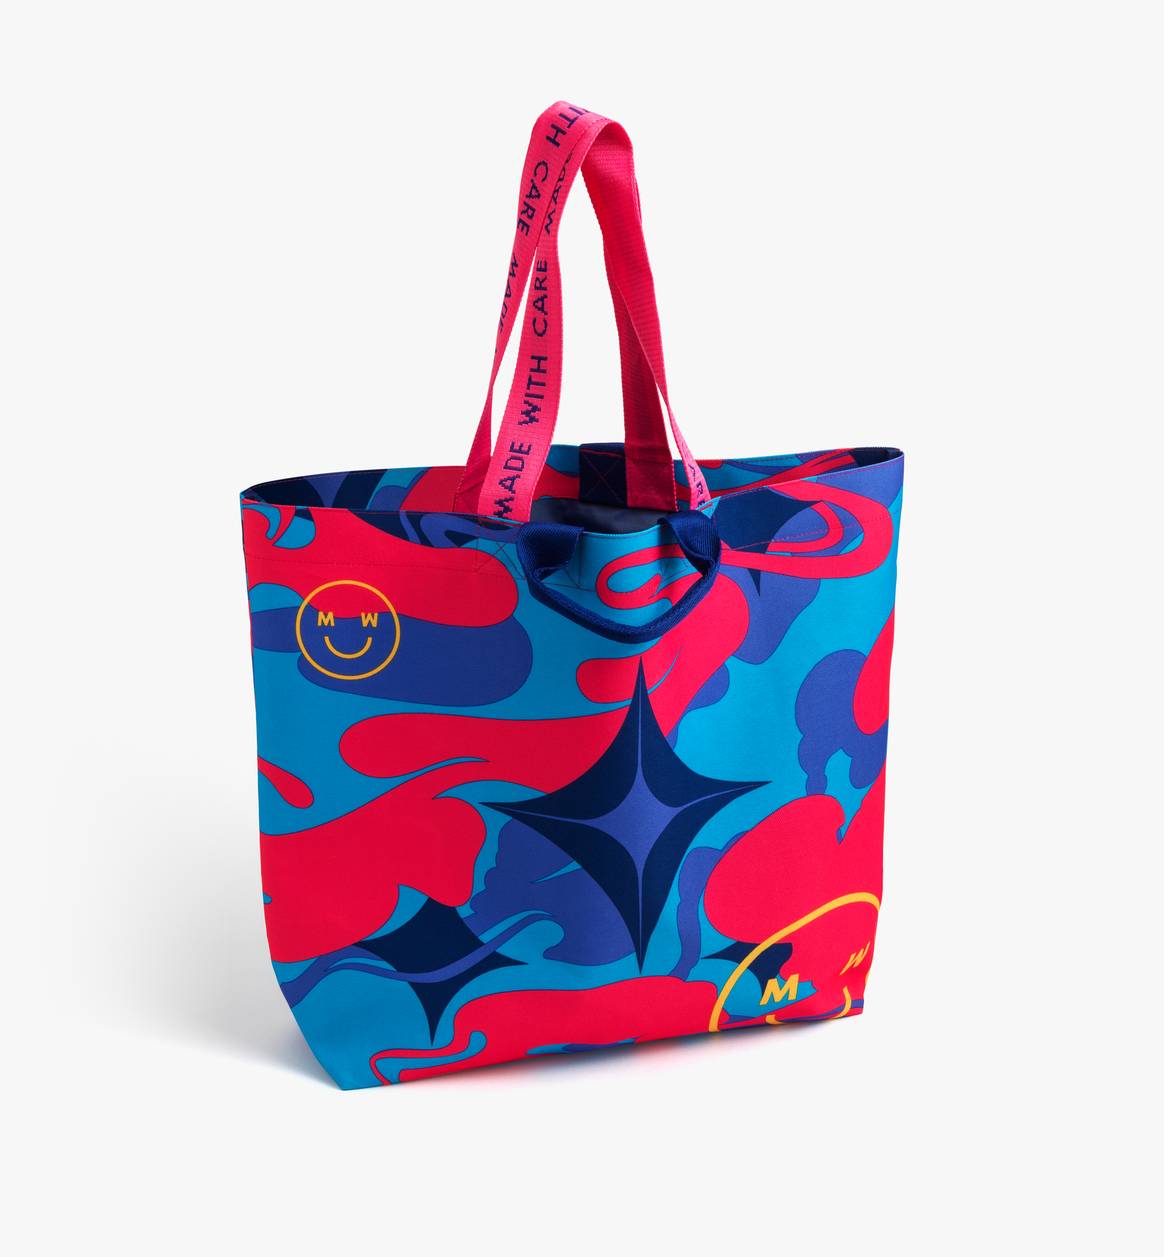 ‘Made With Care’ tote bag designed by Michael Archibald